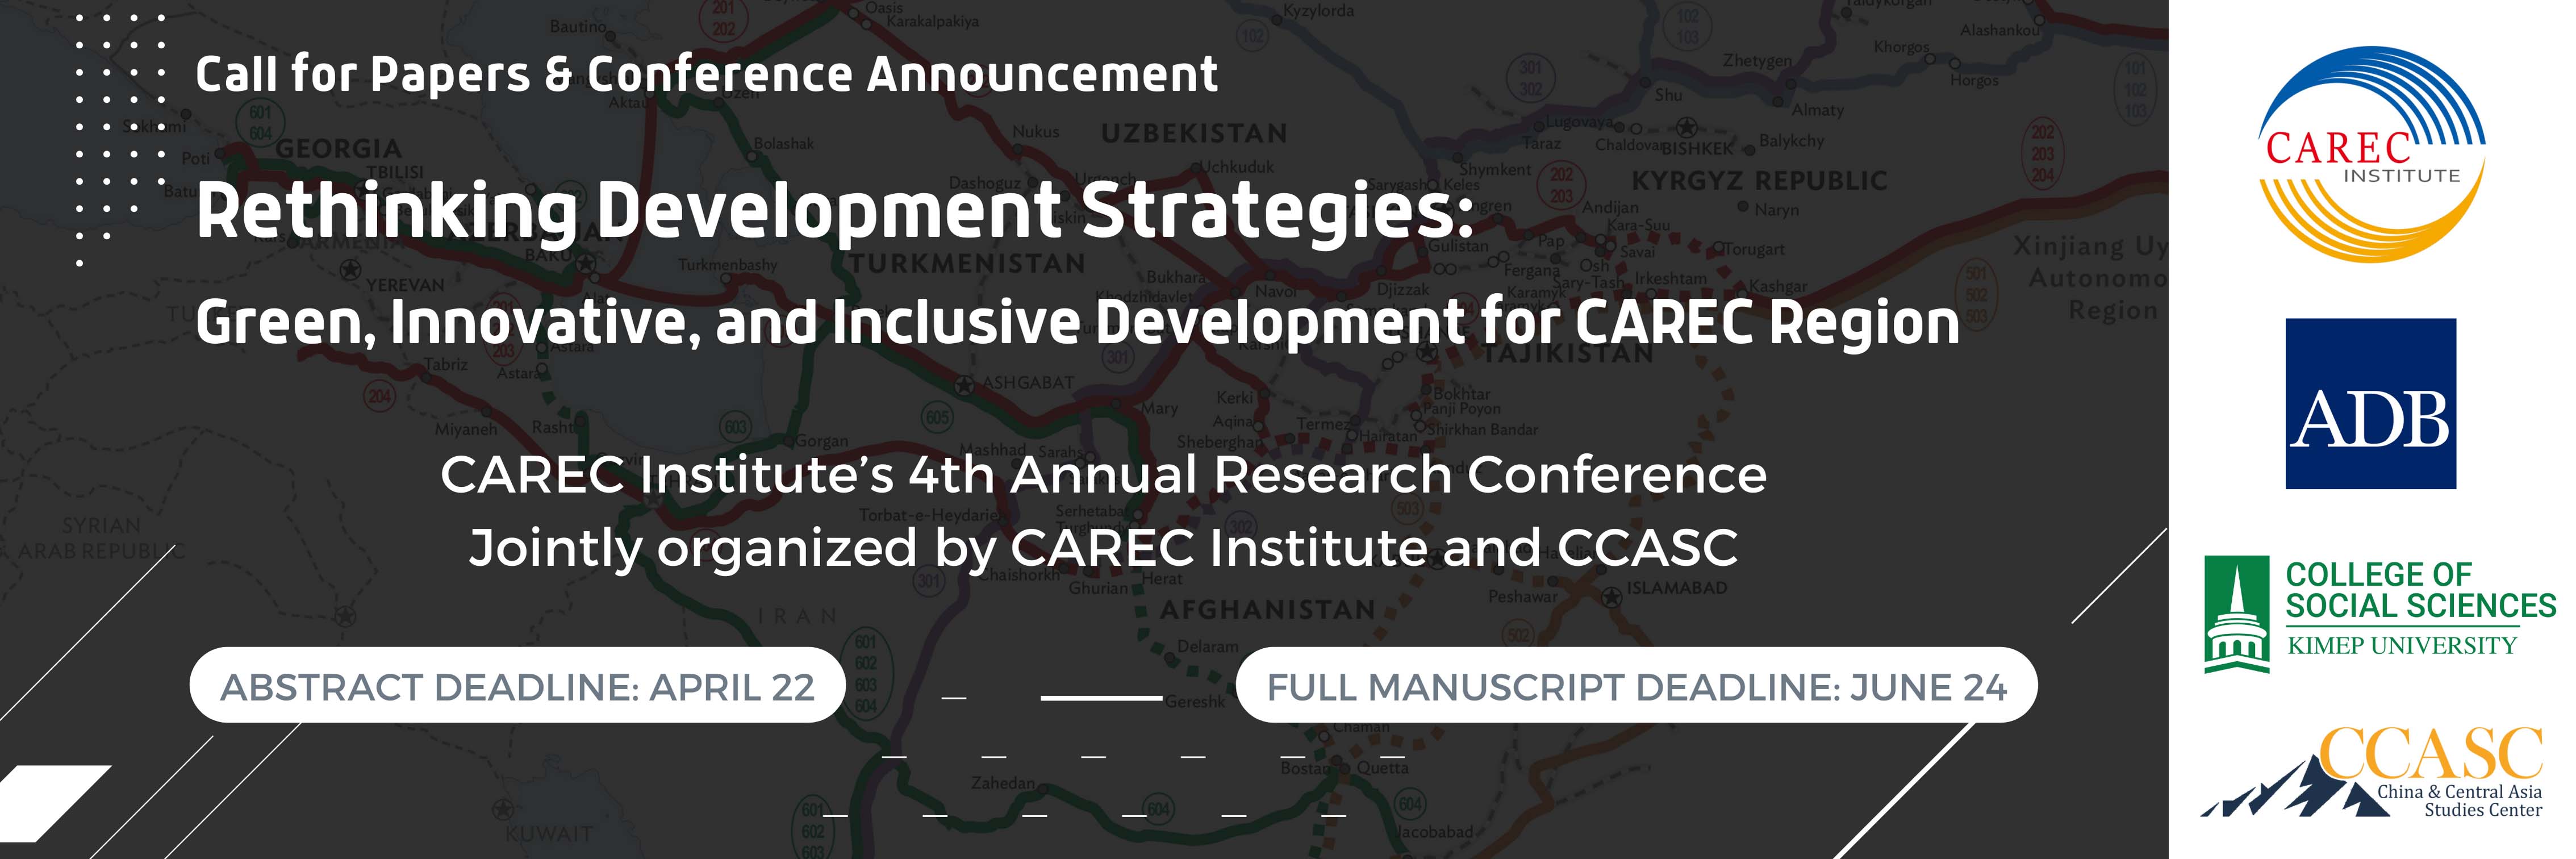 Call for Papers: Rethinking Development Strategies: Green, Innovative, and Inclusive Development for the CAREC region